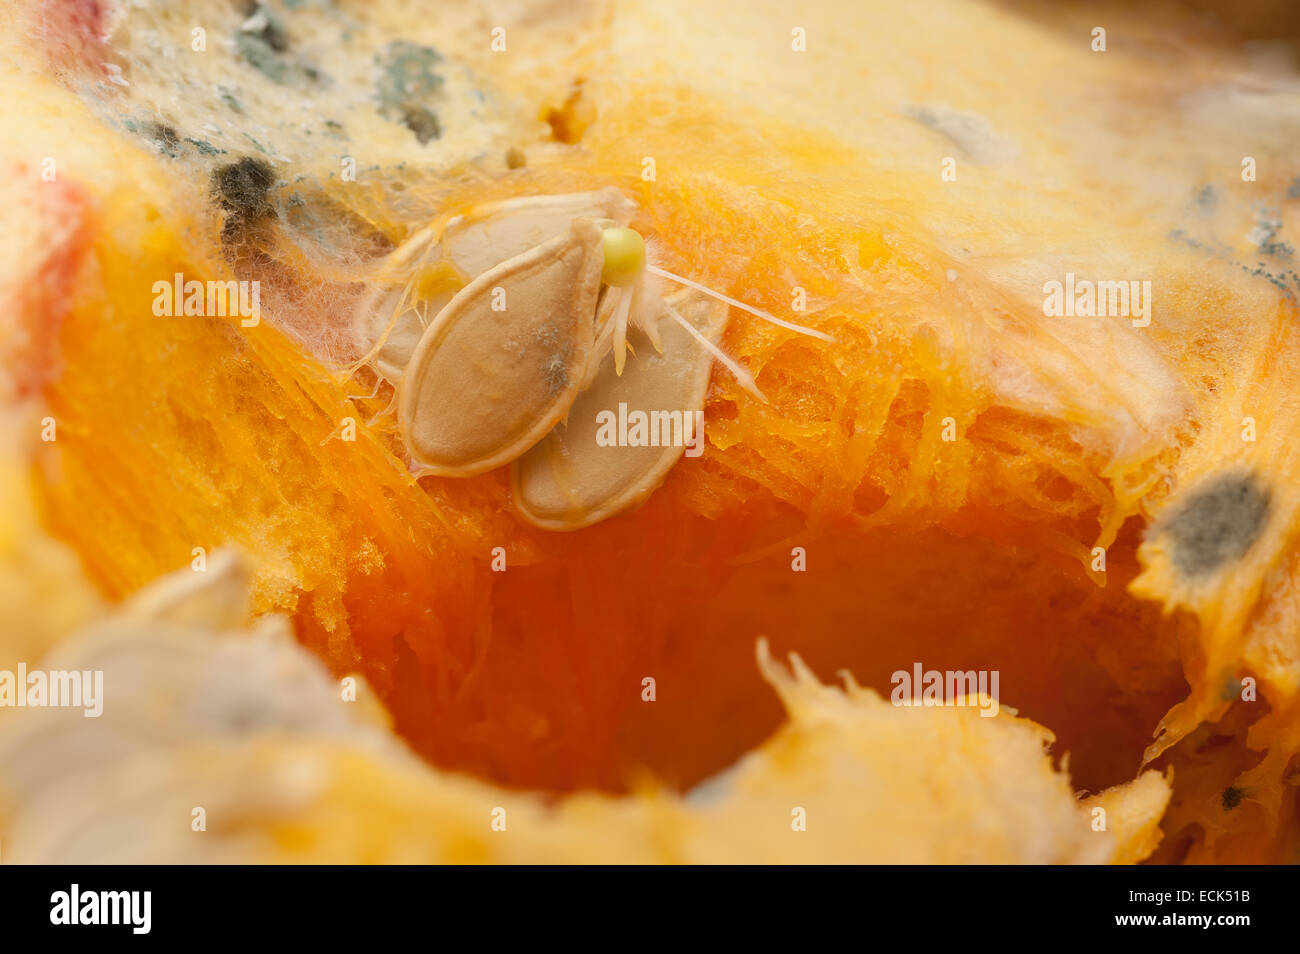 balance between growth and fungi decay of pumpkin flesh pulp with pin mold and germinating seeds with fibrous strings in cavity Stock Photo